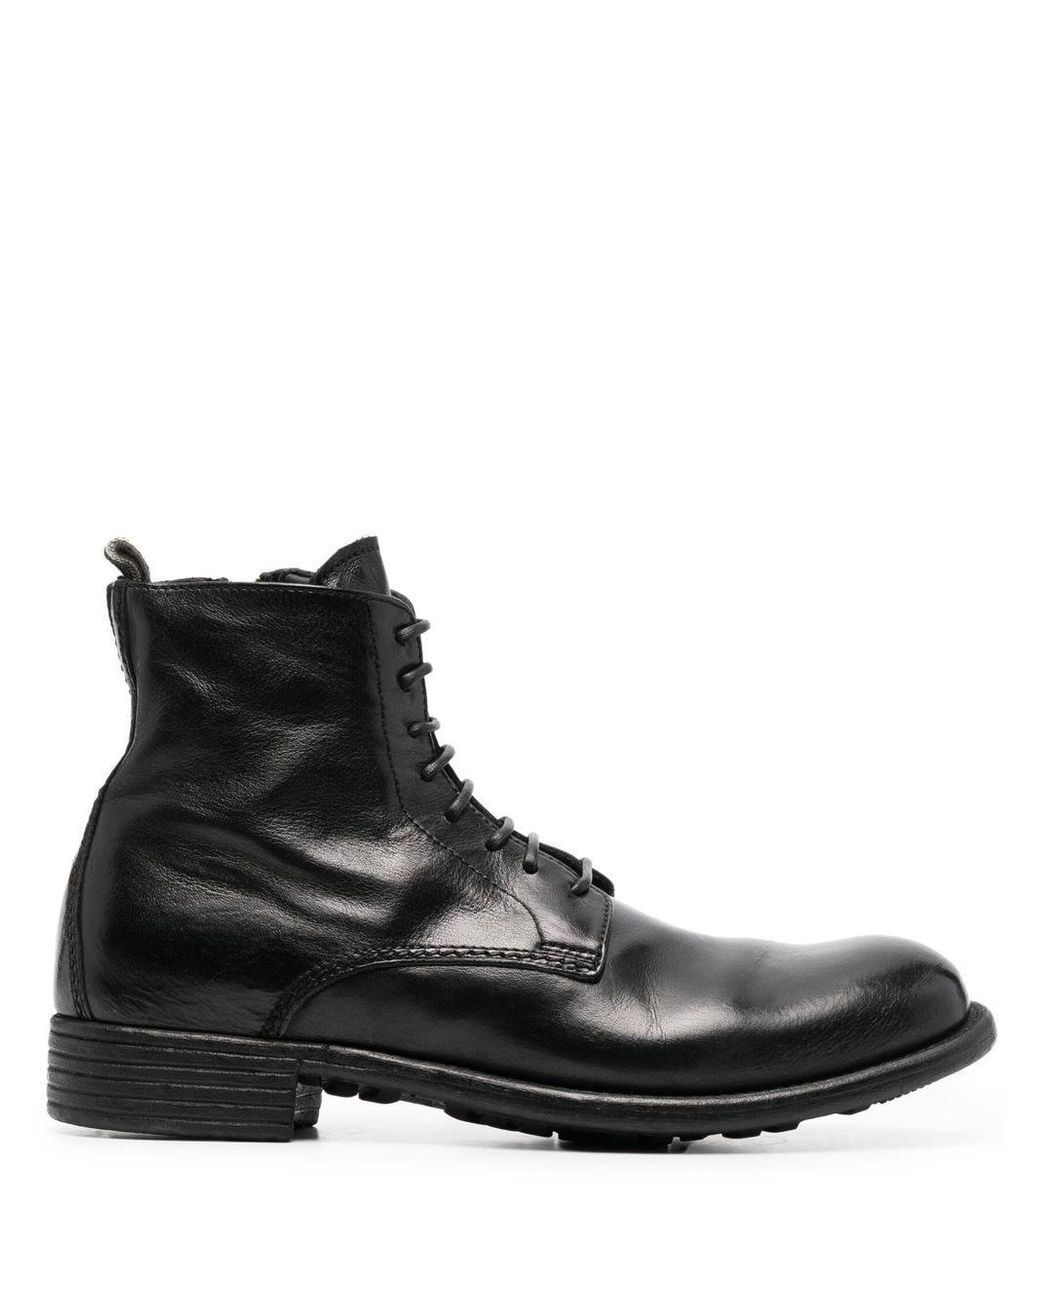 Officine Creative Leather Calixte 002 Lace-up Boots in Black | Lyst